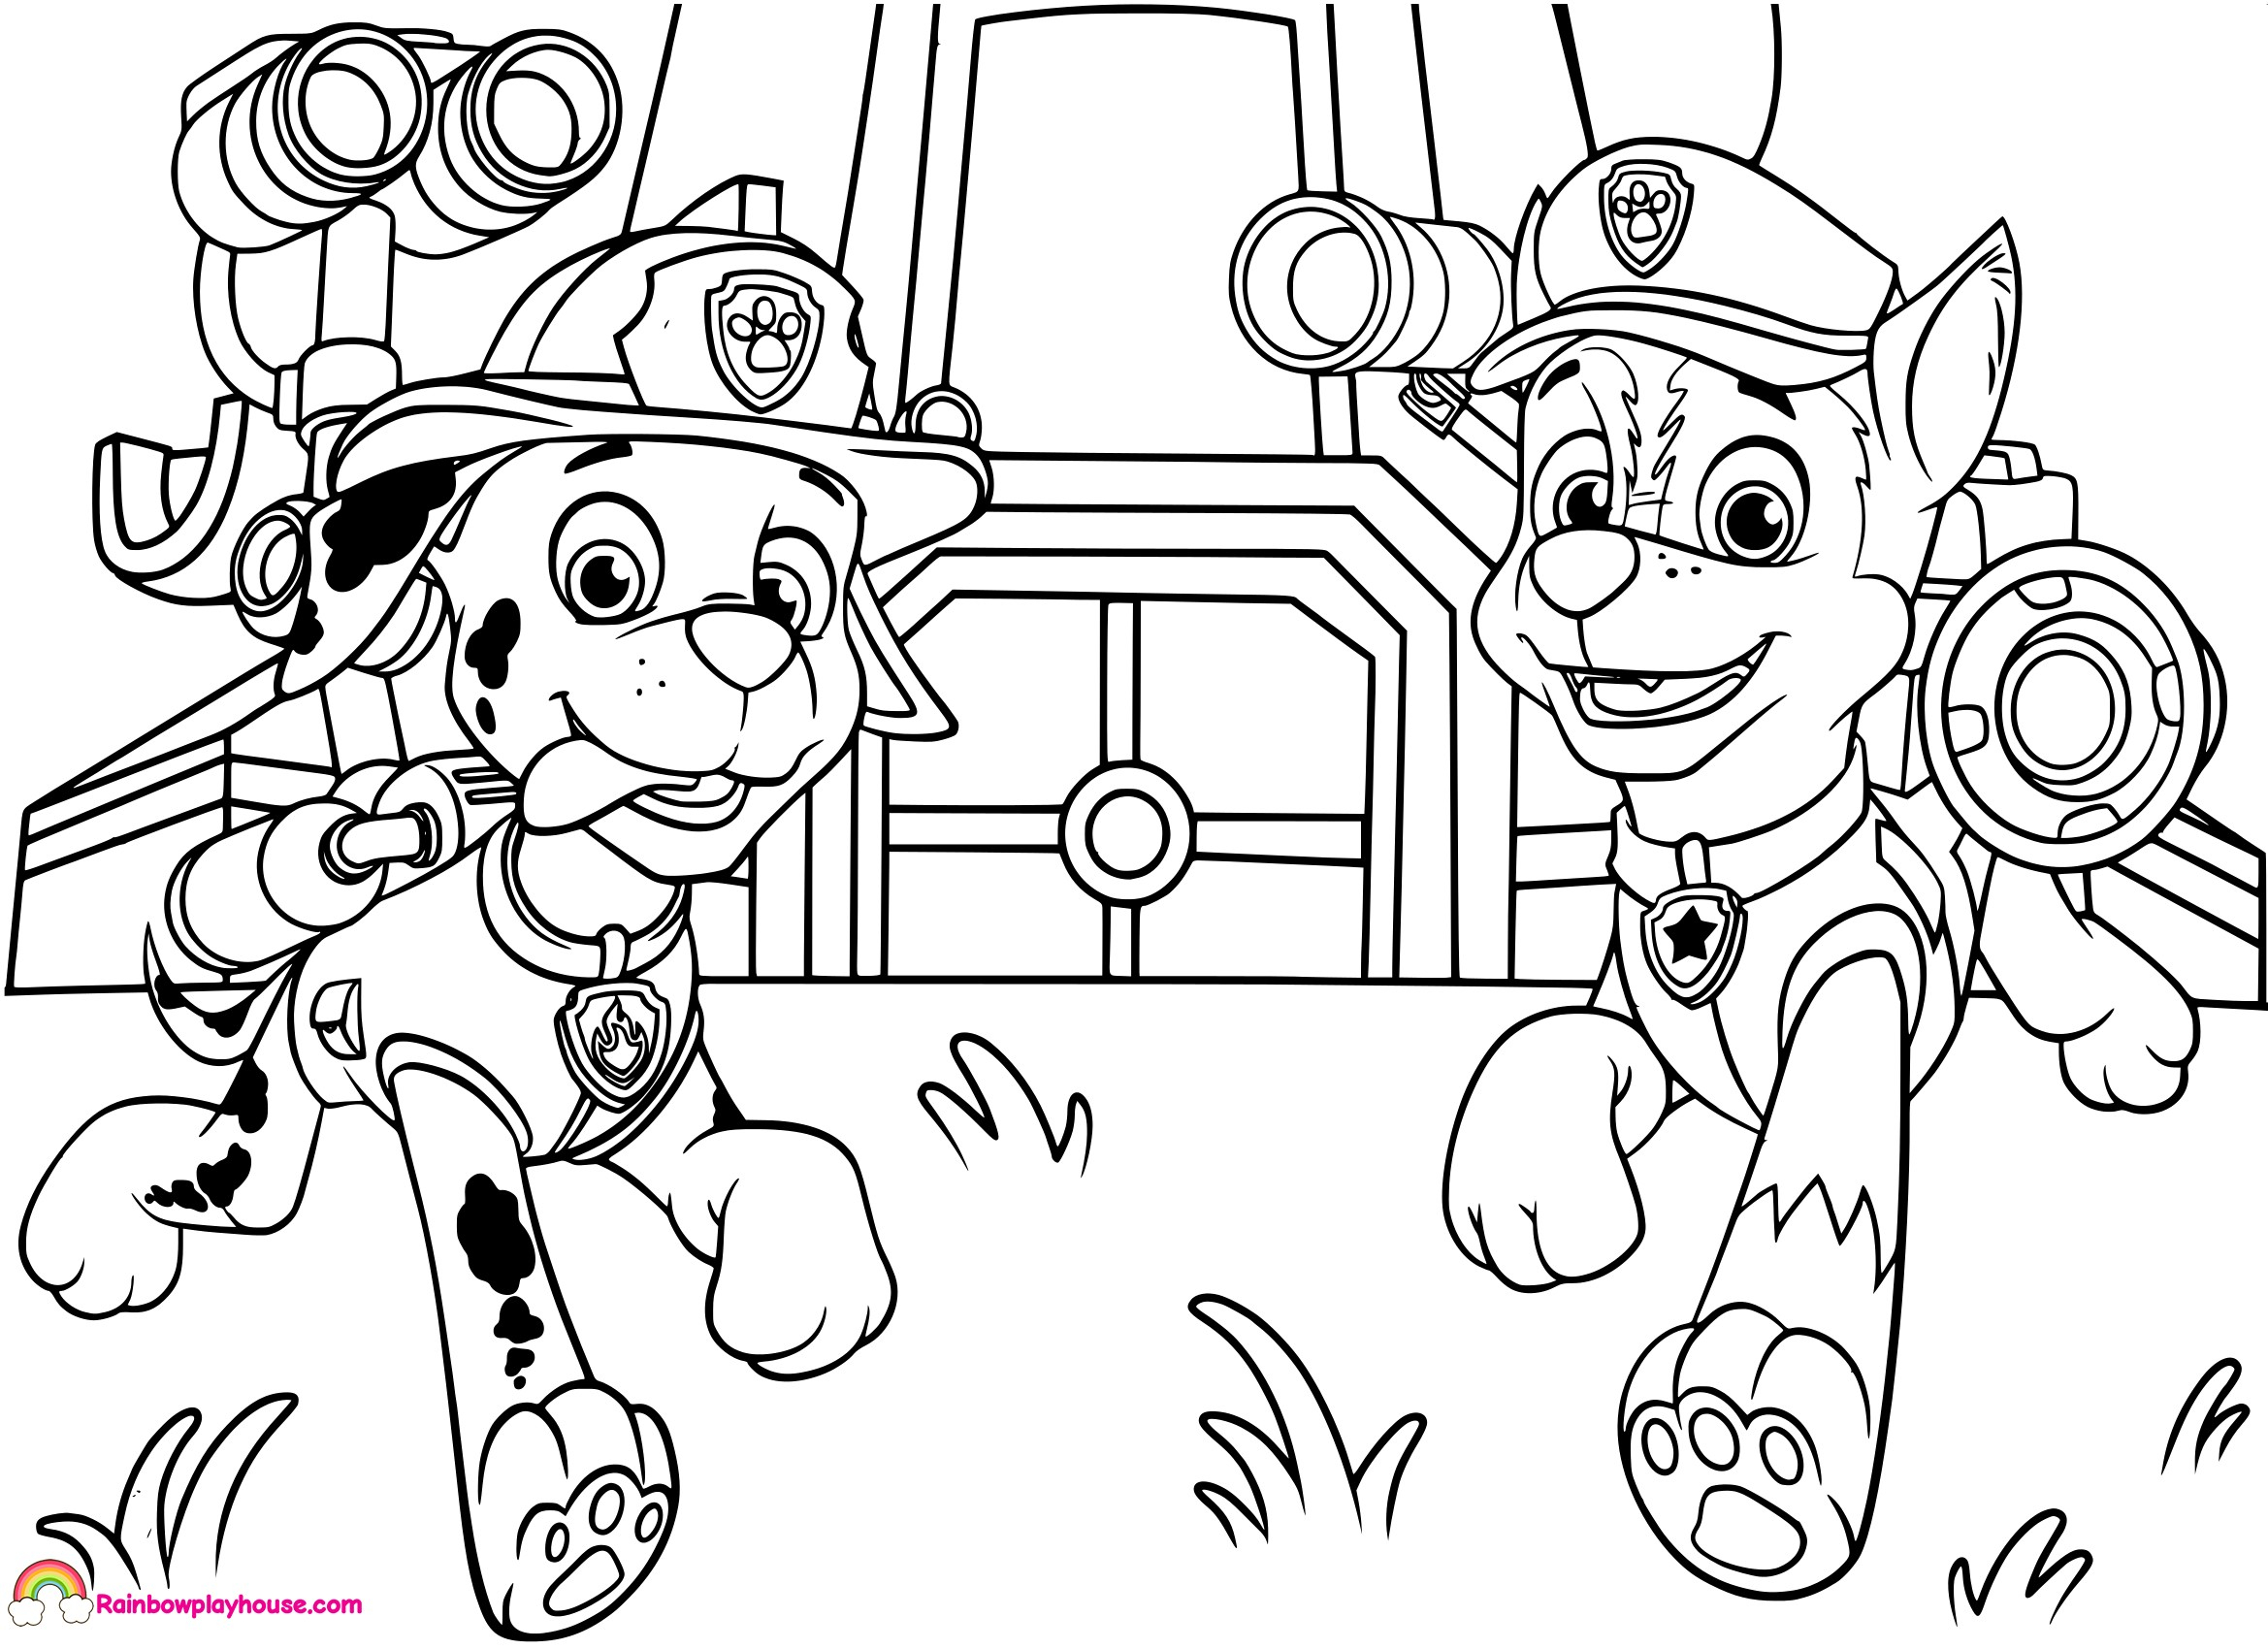 Marshall Paw Patrol Coloring Page Chase From Paw Patrol Coloring Pages